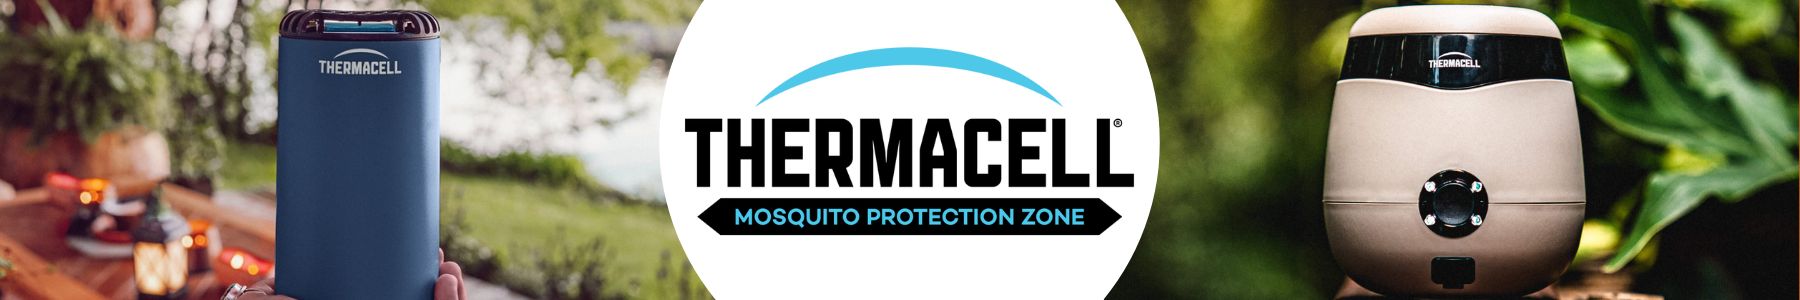 <p>Stop mosquitoes, horse flies and other biting insects before they get close enough to bite or bother you.&nbsp; <span>Thermacell repellent devices repel mosquitoes by creating a 21m&sup2; zone of area repellent. This repellent, allethrin, is a synthetic copy of a natural repellent found in chrysanthemum plants.&nbsp;&nbsp;<br>Thermacell units&nbsp;are compact, lightweight and mobile and are completely safe around children and pets.&nbsp;&nbsp;With&nbsp;a Thermacell device you can say goodbye to messy chemical sprays and lotions.</span></p>
<p><strong>JUST TURN IT ON........MOSQUITOES ARE GONE</strong></p>